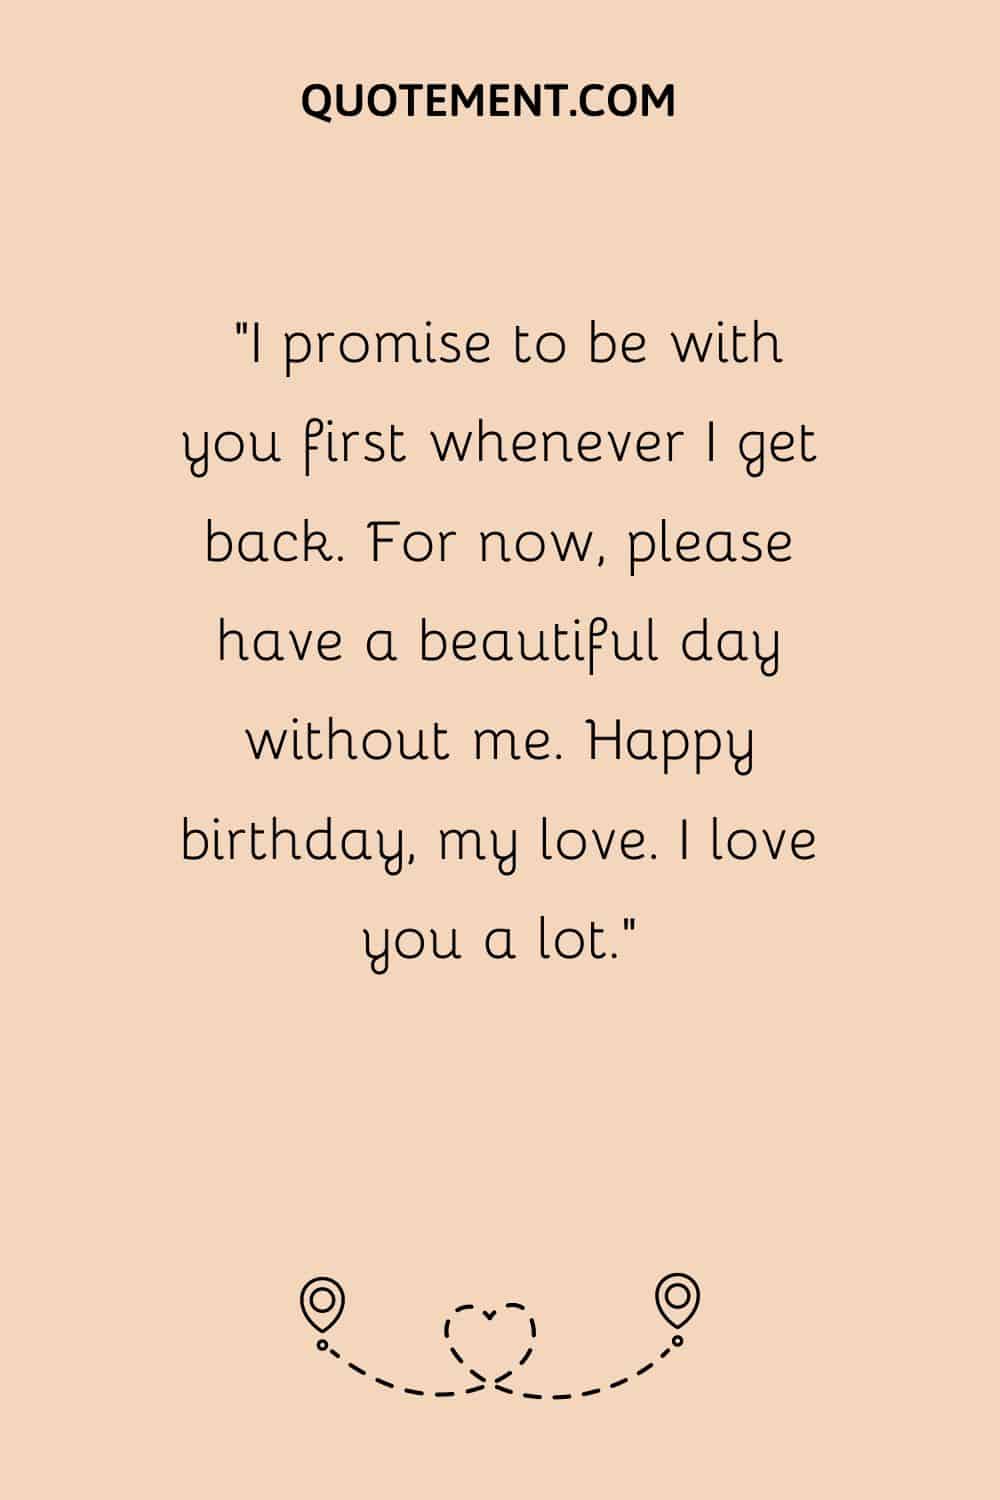 “I promise to be with you first whenever I get back. For now, please have a beautiful day without me. Happy birthday, my love. I love you a lot.”